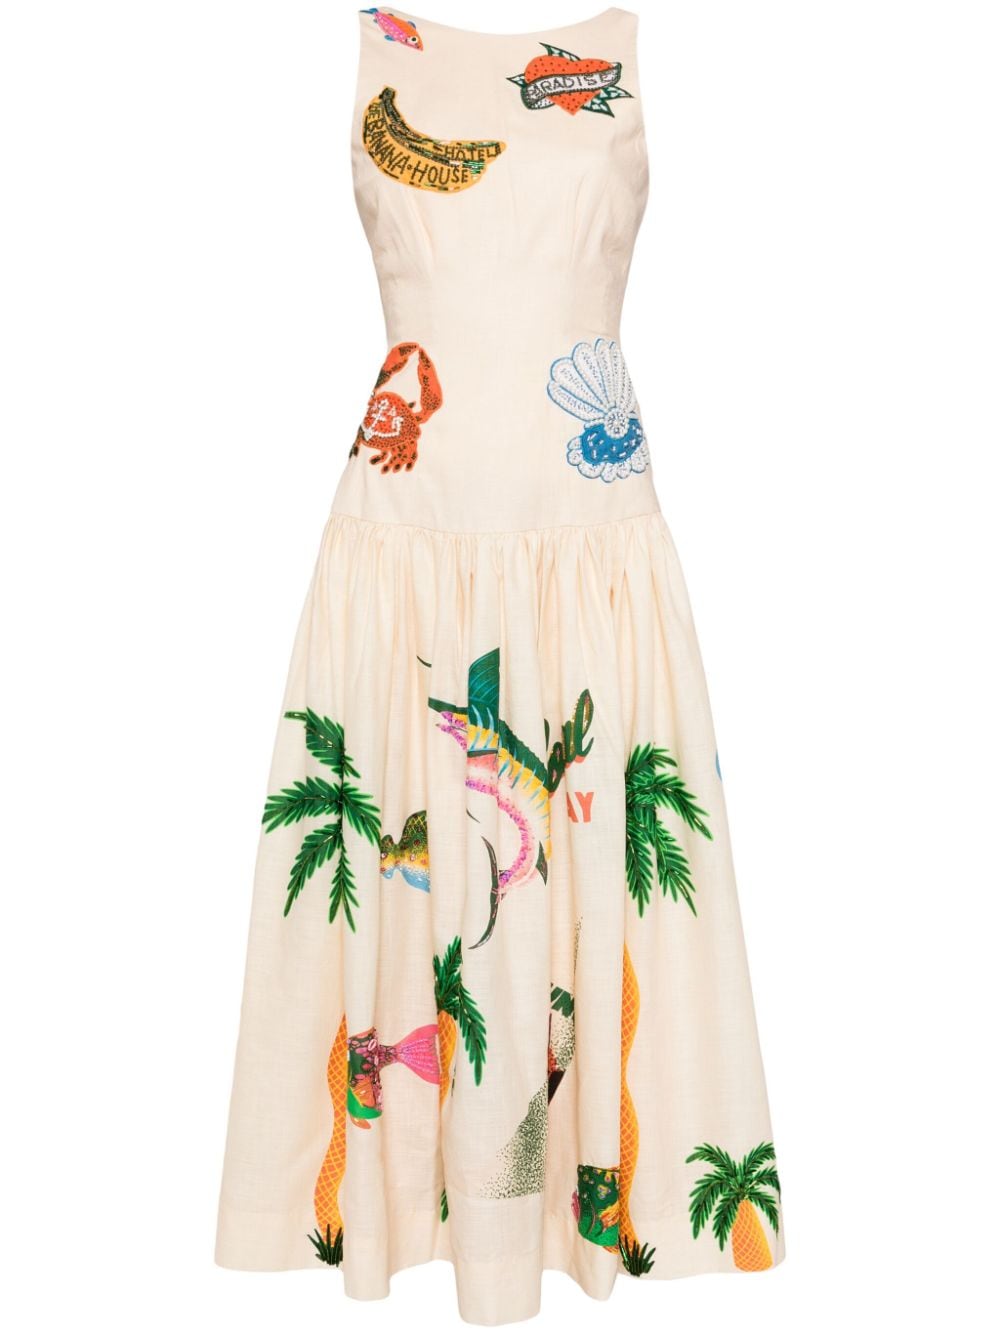 Alemais X Alan Berry Rhys Beaded Dress In Nude